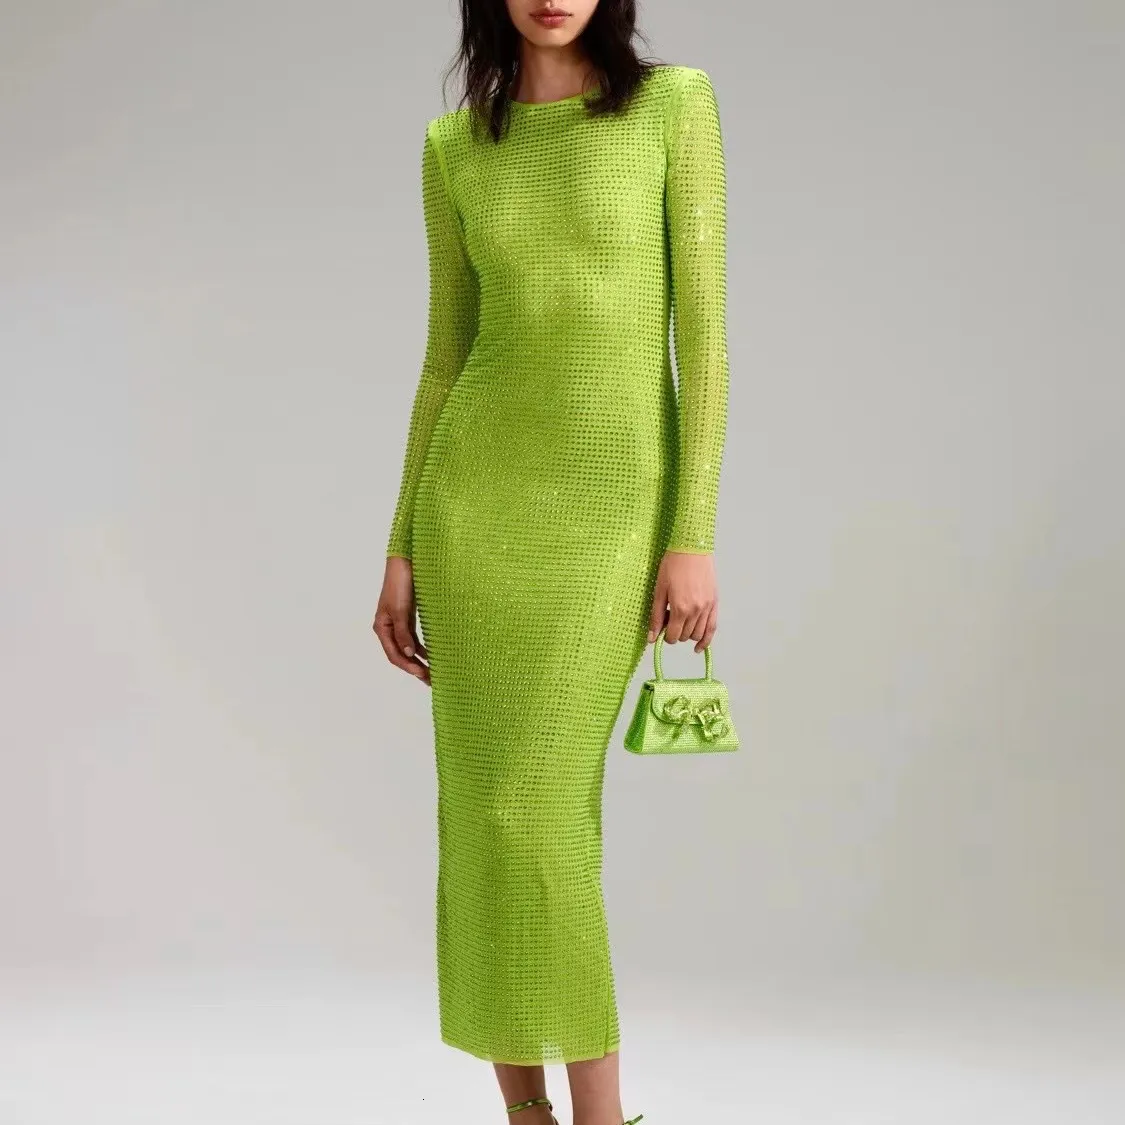 Basic Casual Dresses Green Sequined Beaded Party Dress Women Blingbling Bodycon Long Sleeve Long Dress 230721